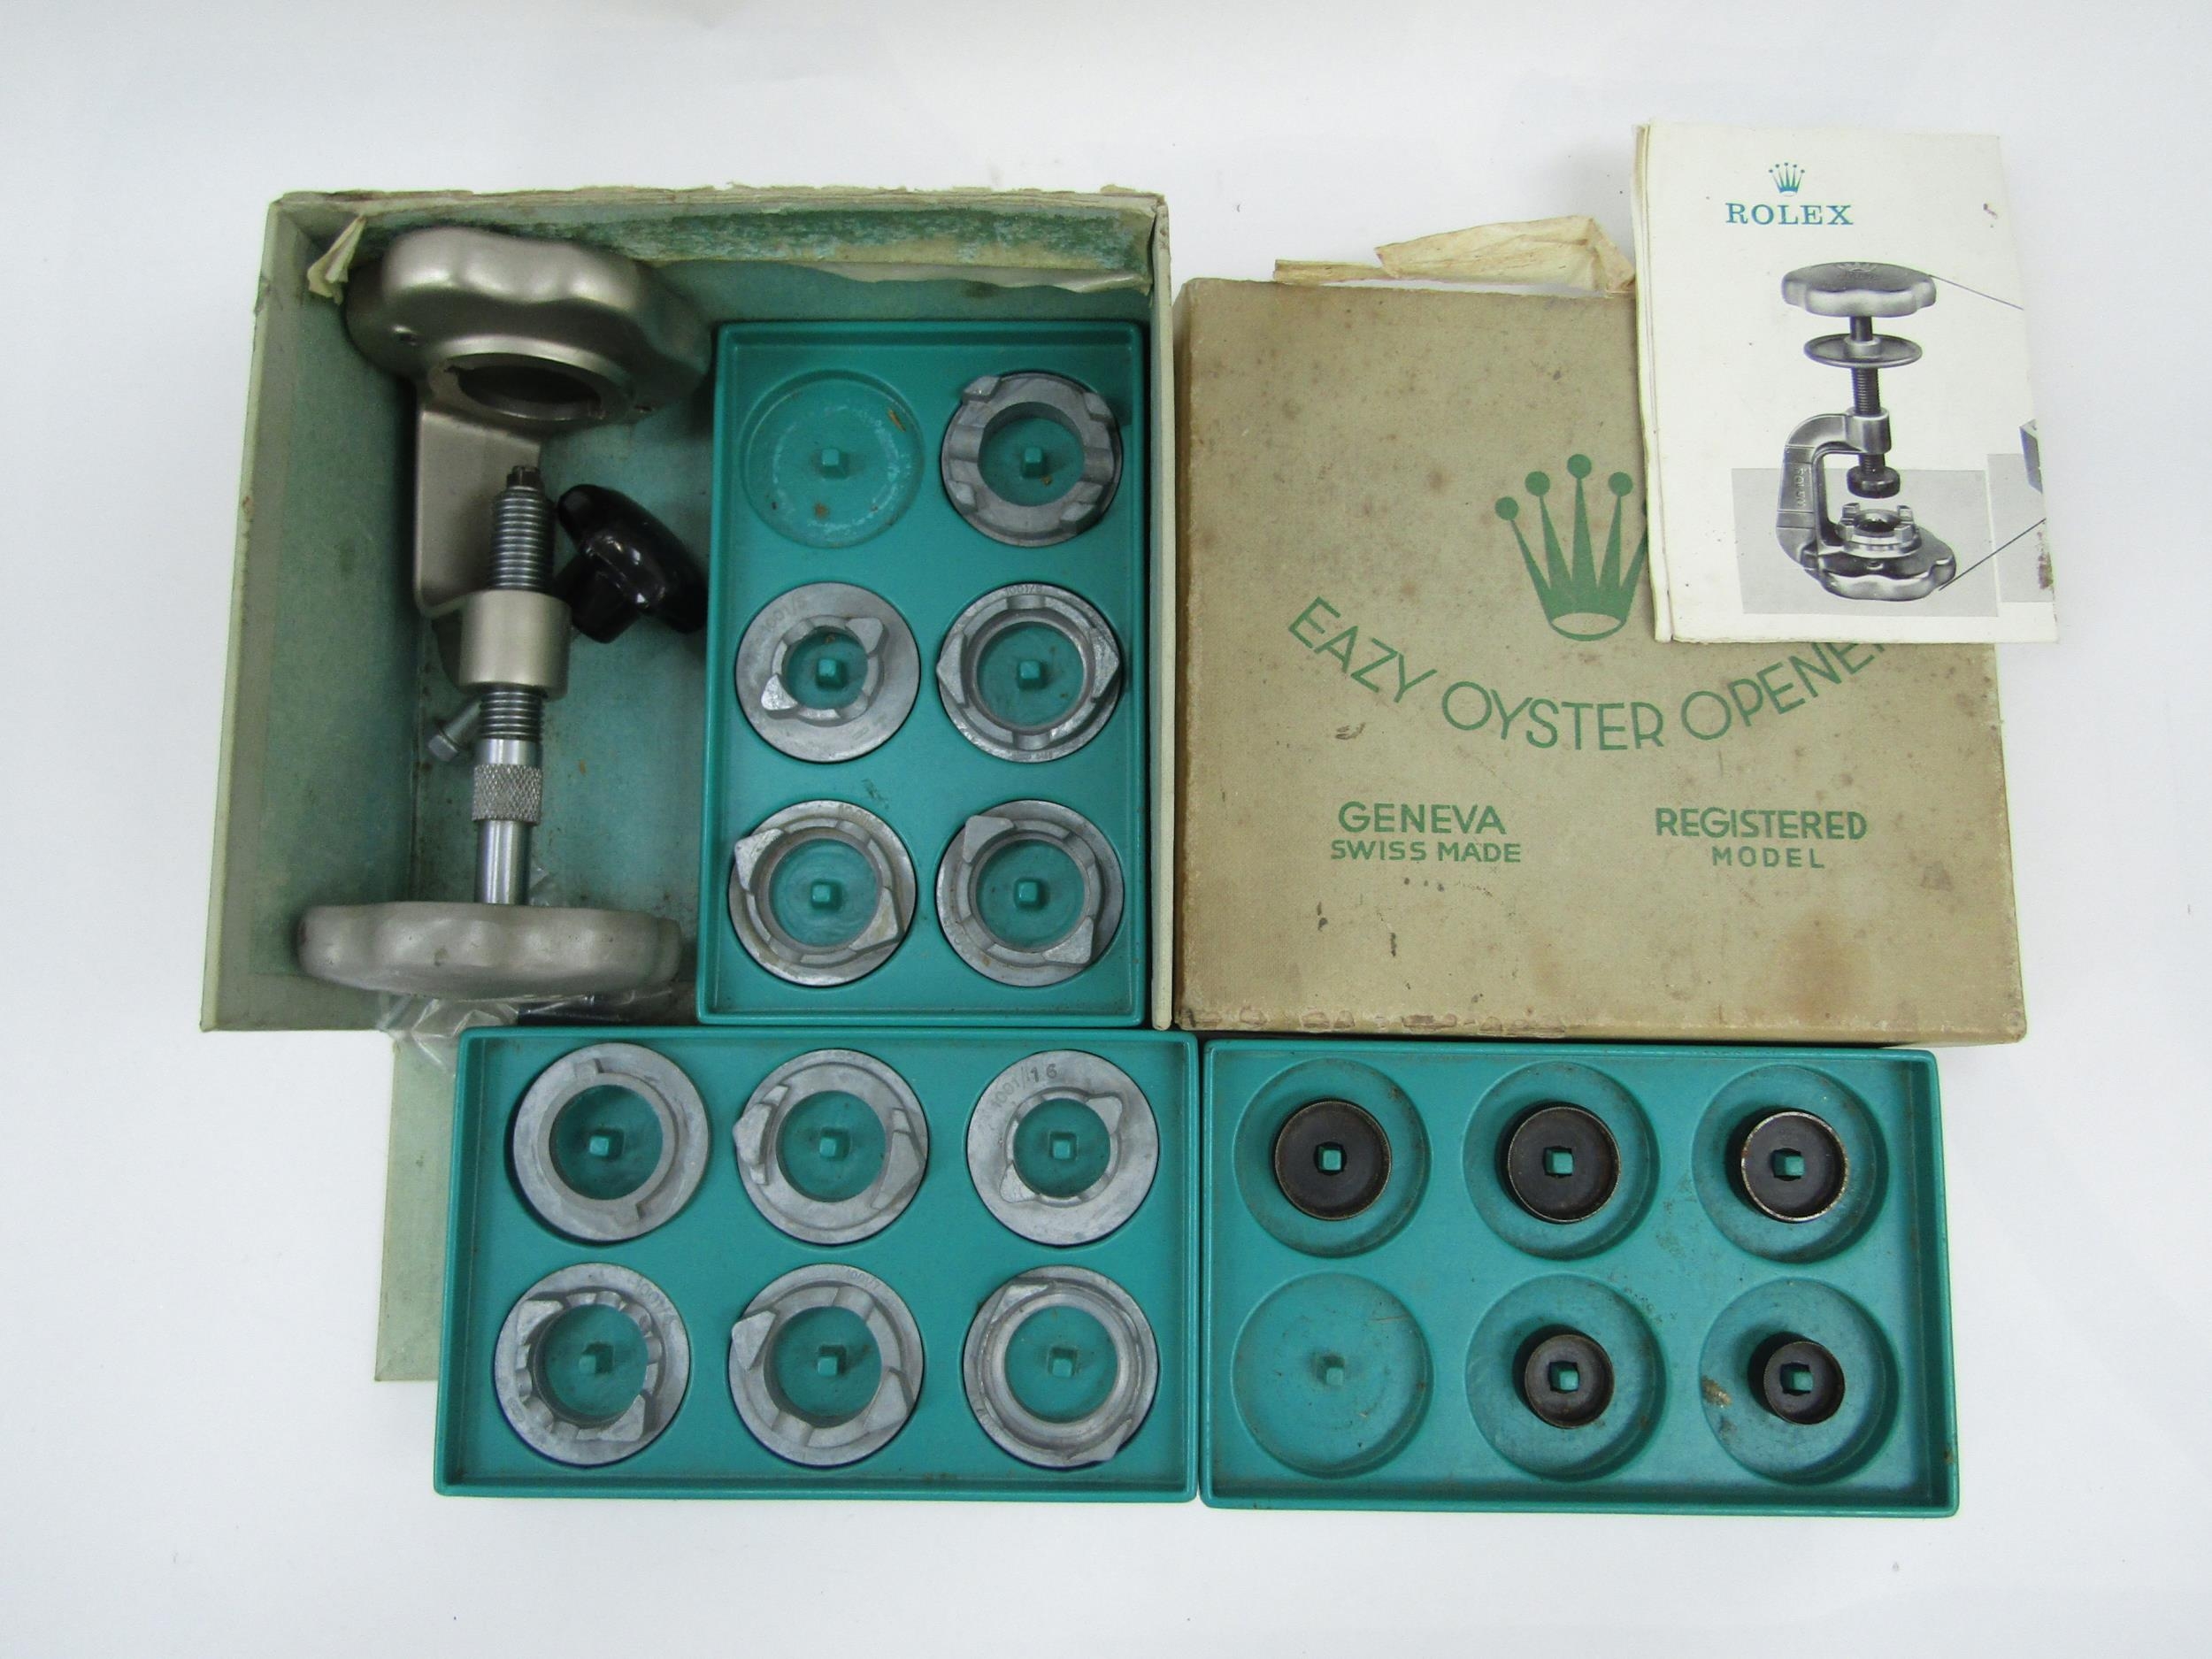 A Bergeon No. 5555 watch pressure testing machine, with a boxed Rolex vintage Eazy Oyster Opener - Image 3 of 3